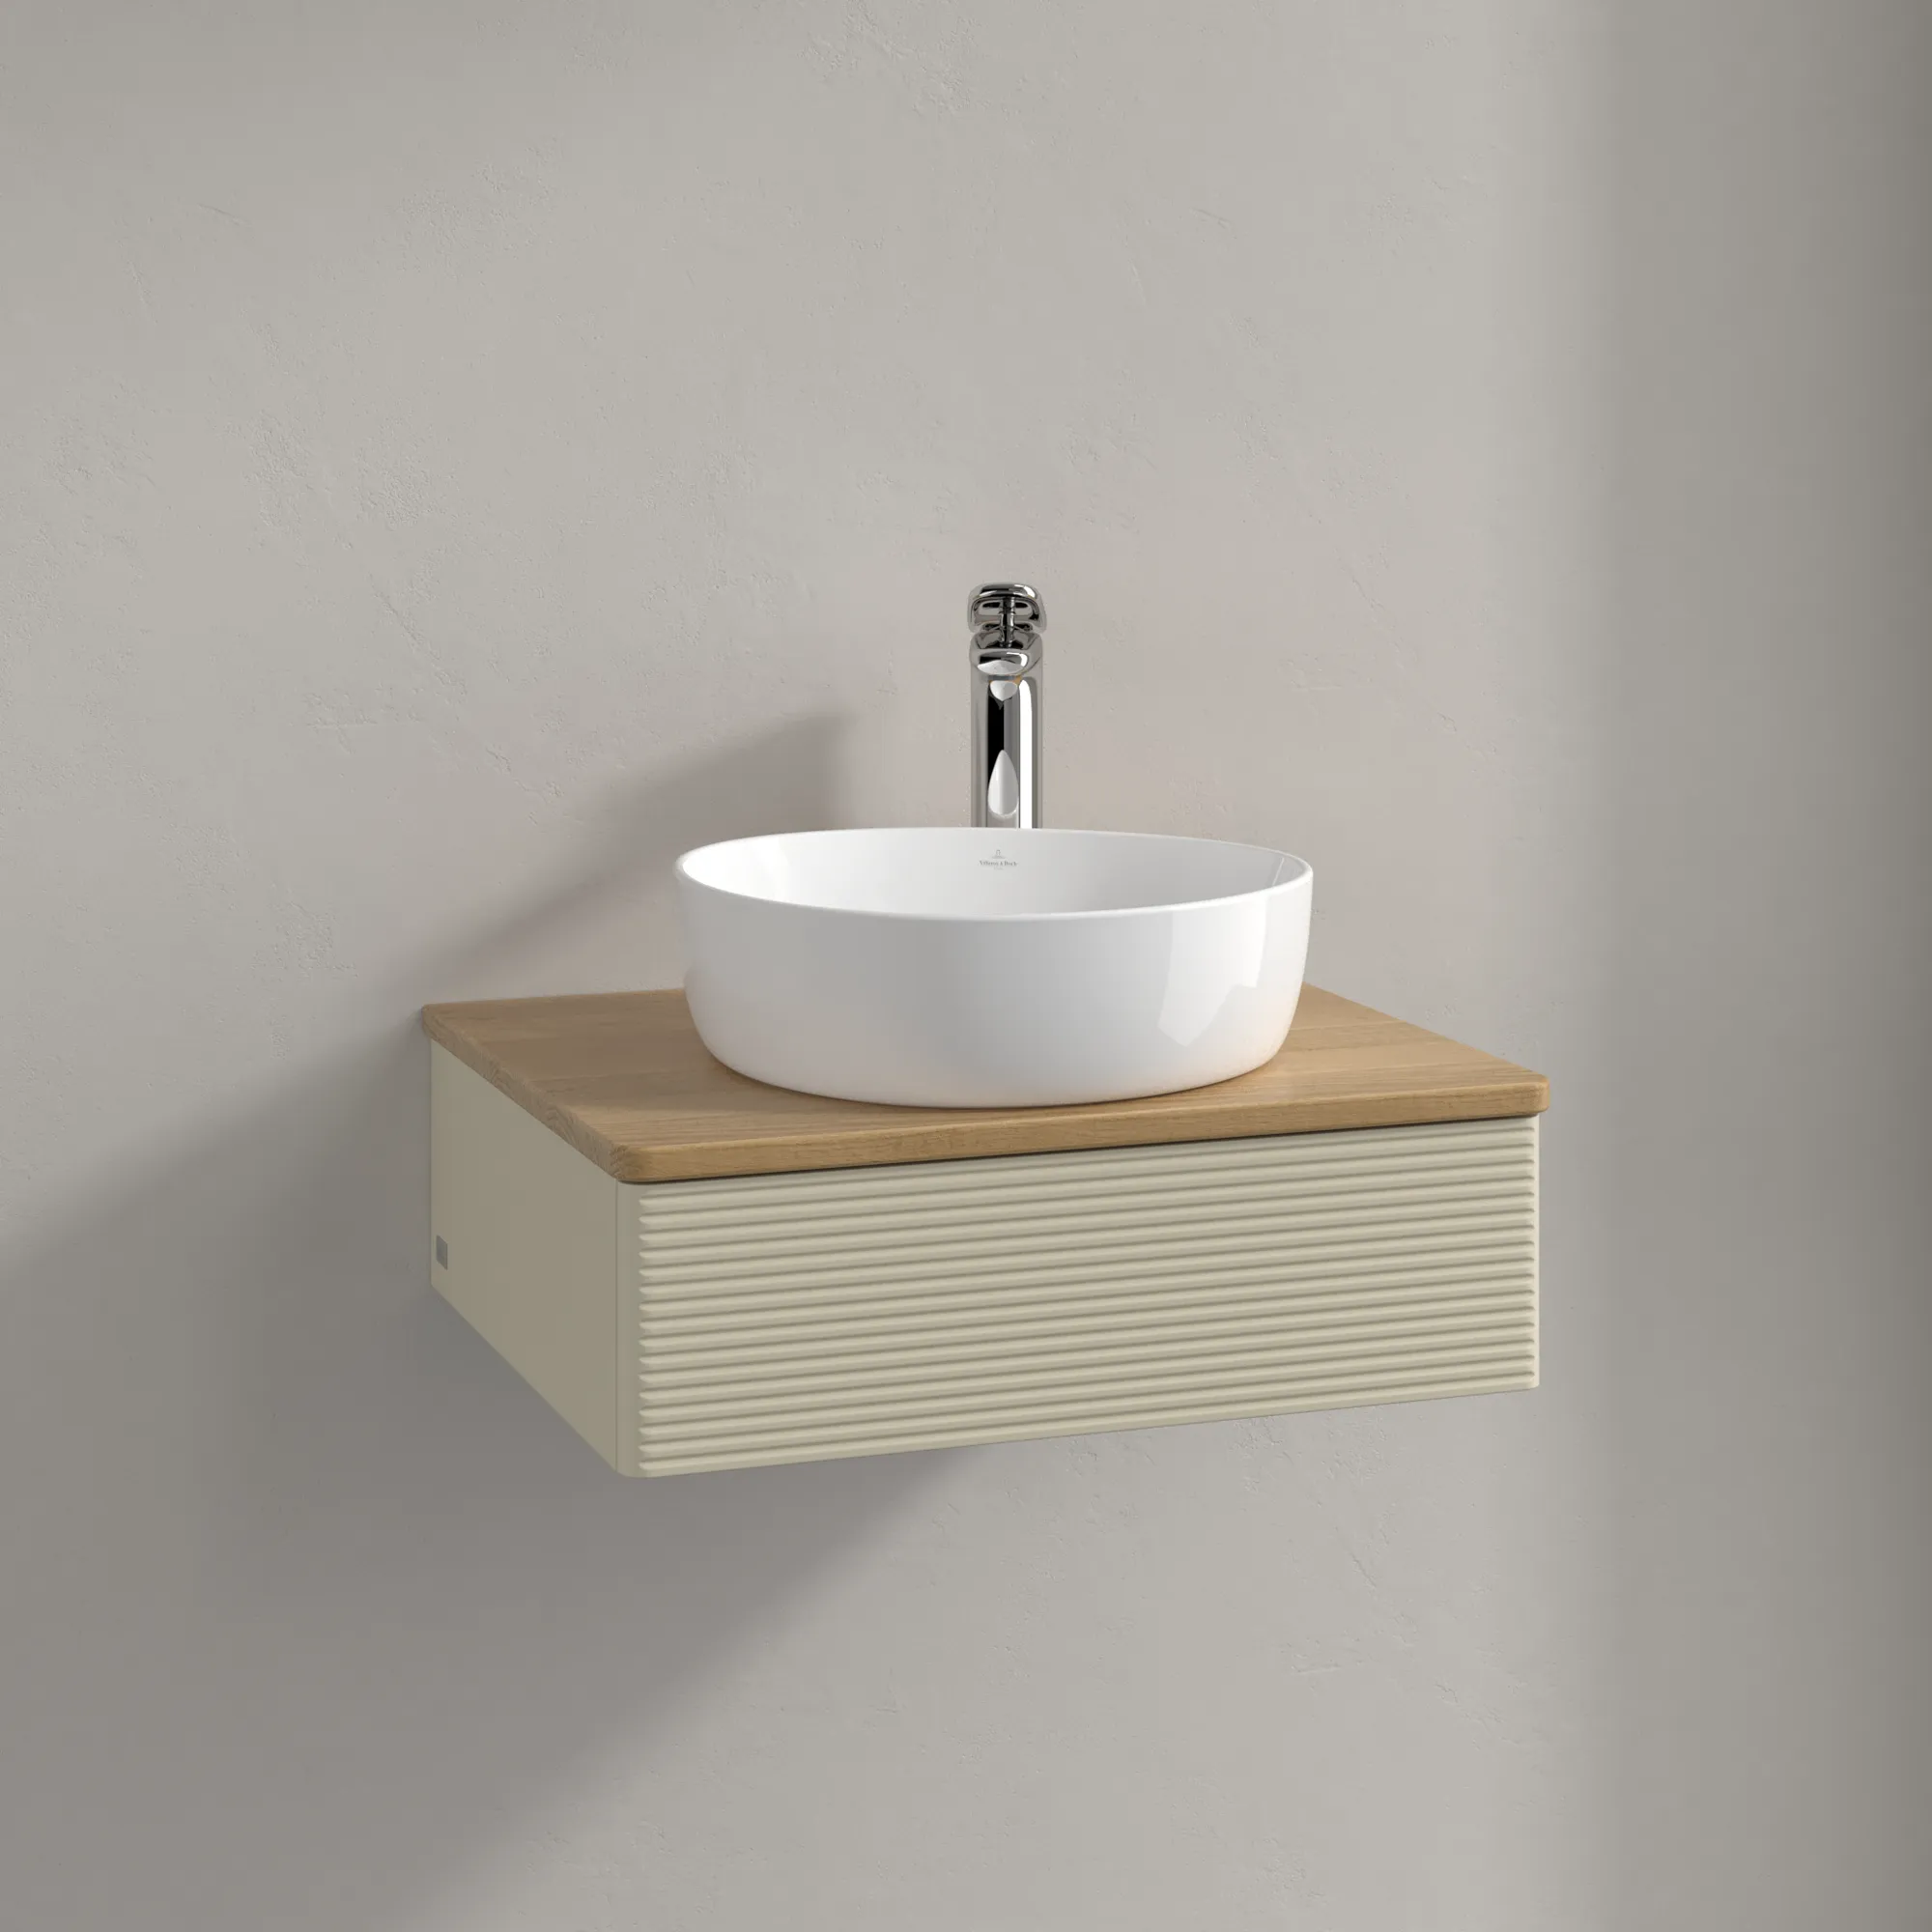 Зображення з  VILLEROY BOCH Antao Vanity unit, with lighting, 1 pull-out compartment, 600 x 190 x 500 mm, Front with grain texture, Silk Grey Matt Lacquer / Honey Oak #L07151HJ